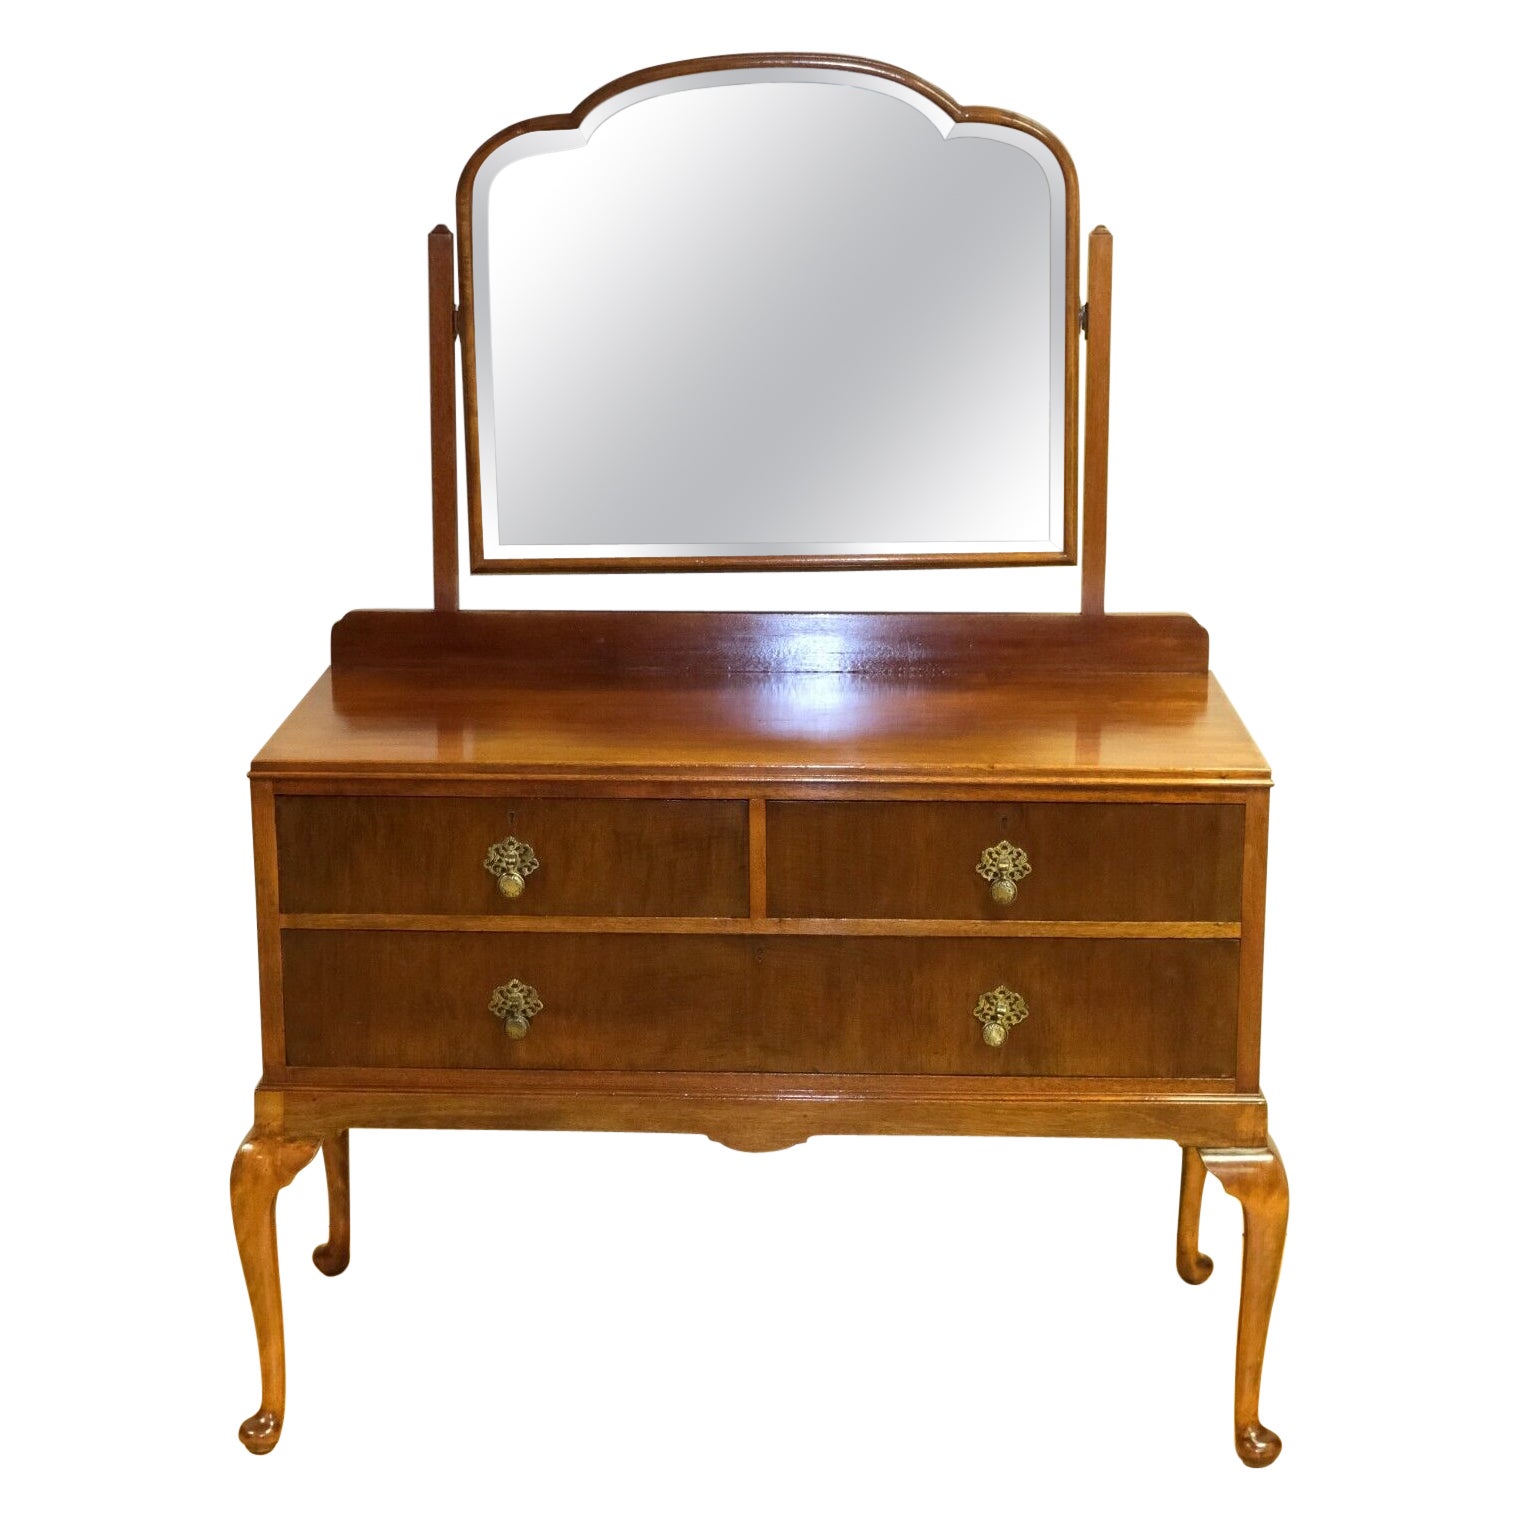 LOVELY EARLY 20TH CENTURY HARDWOOD DRESSiNG TABLE RAISED ON CABRIOLE LEGS im Angebot